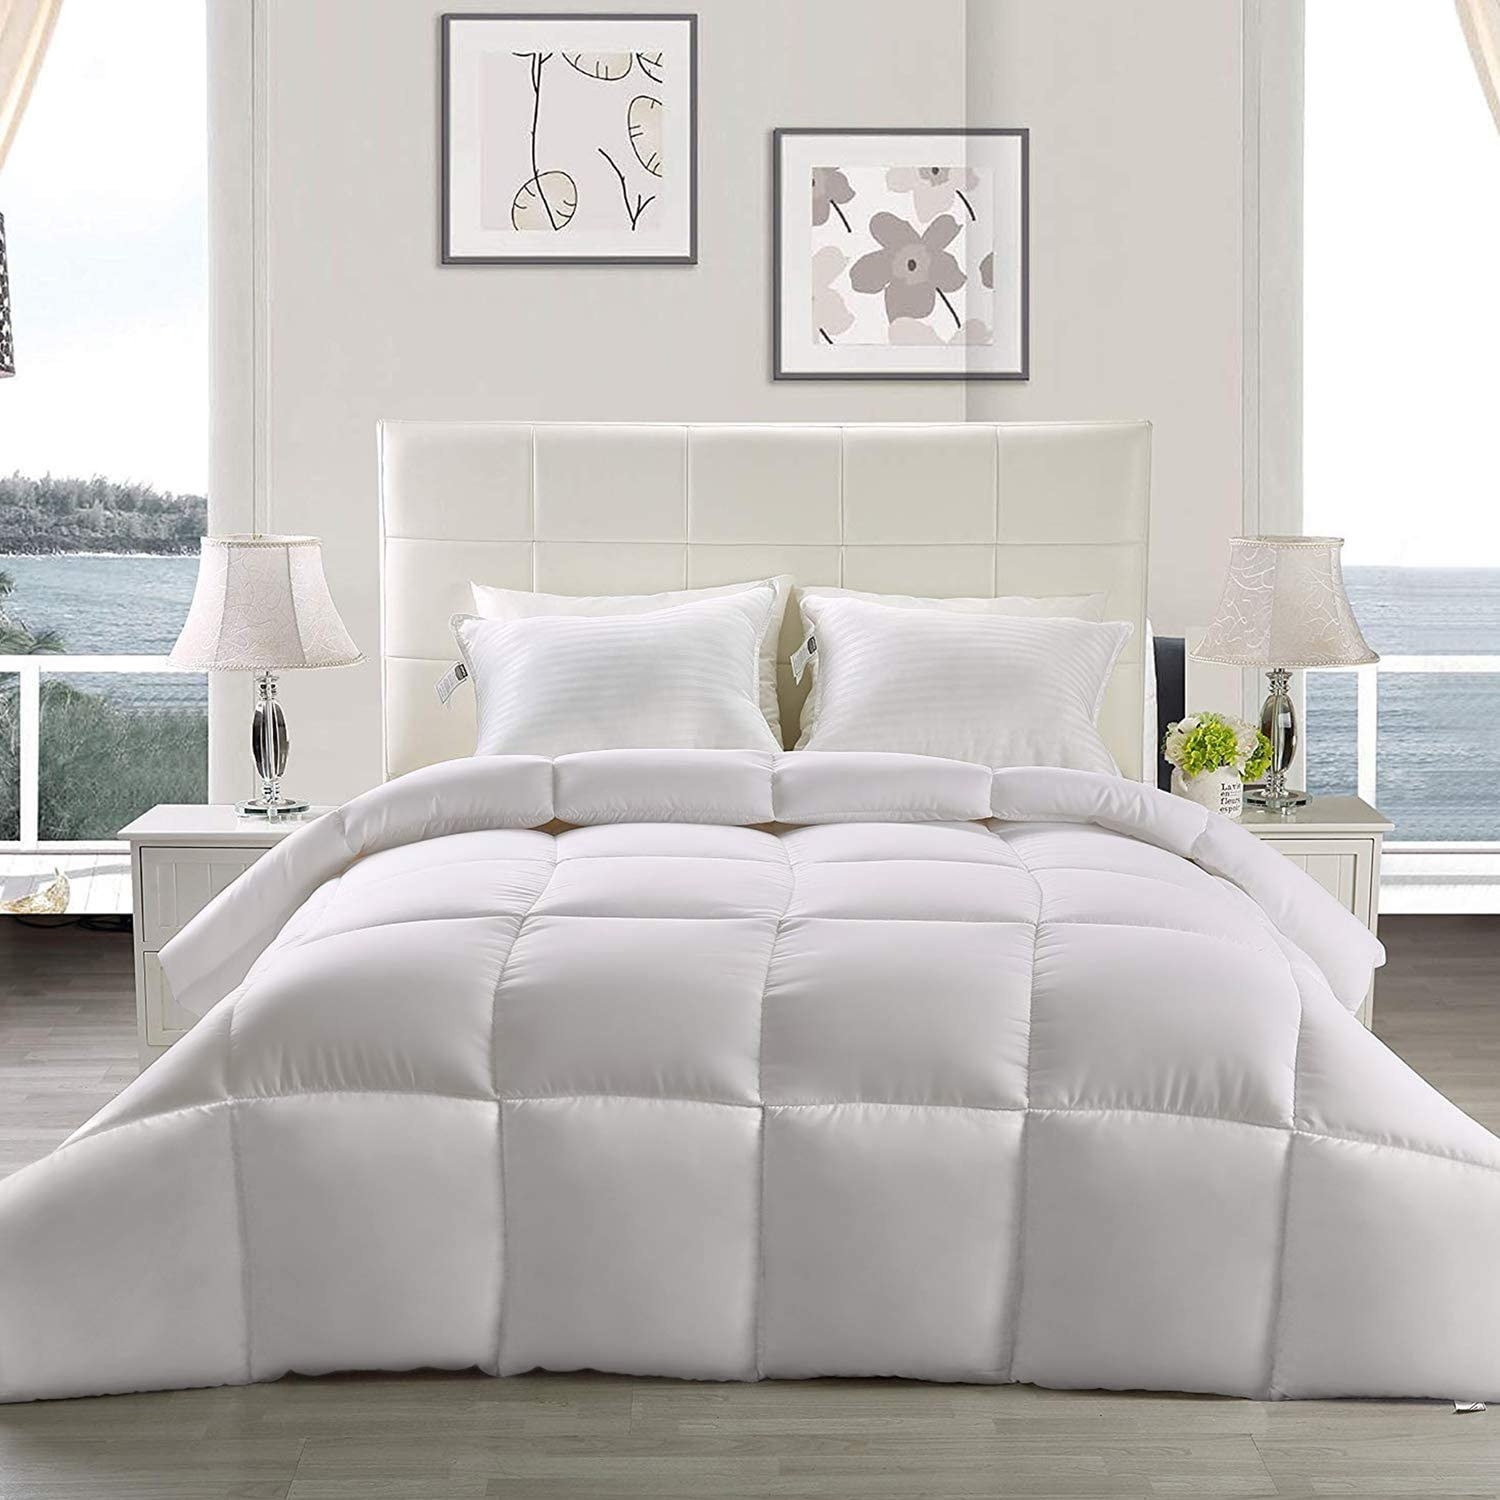 the comforter on a bed